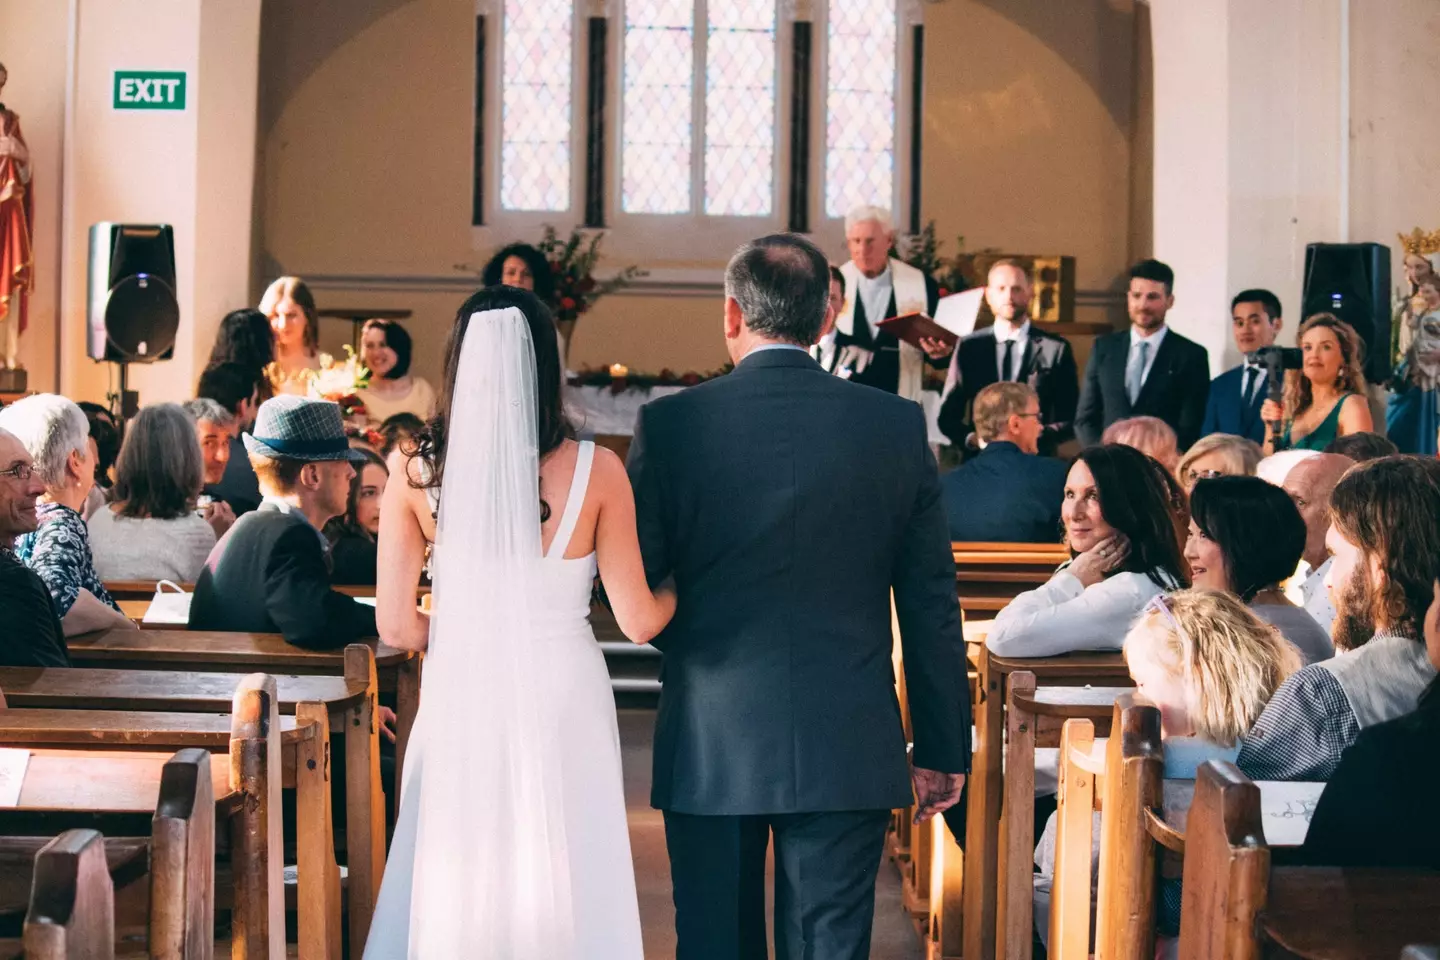 Churches will be able to hold weddings outdoors again (